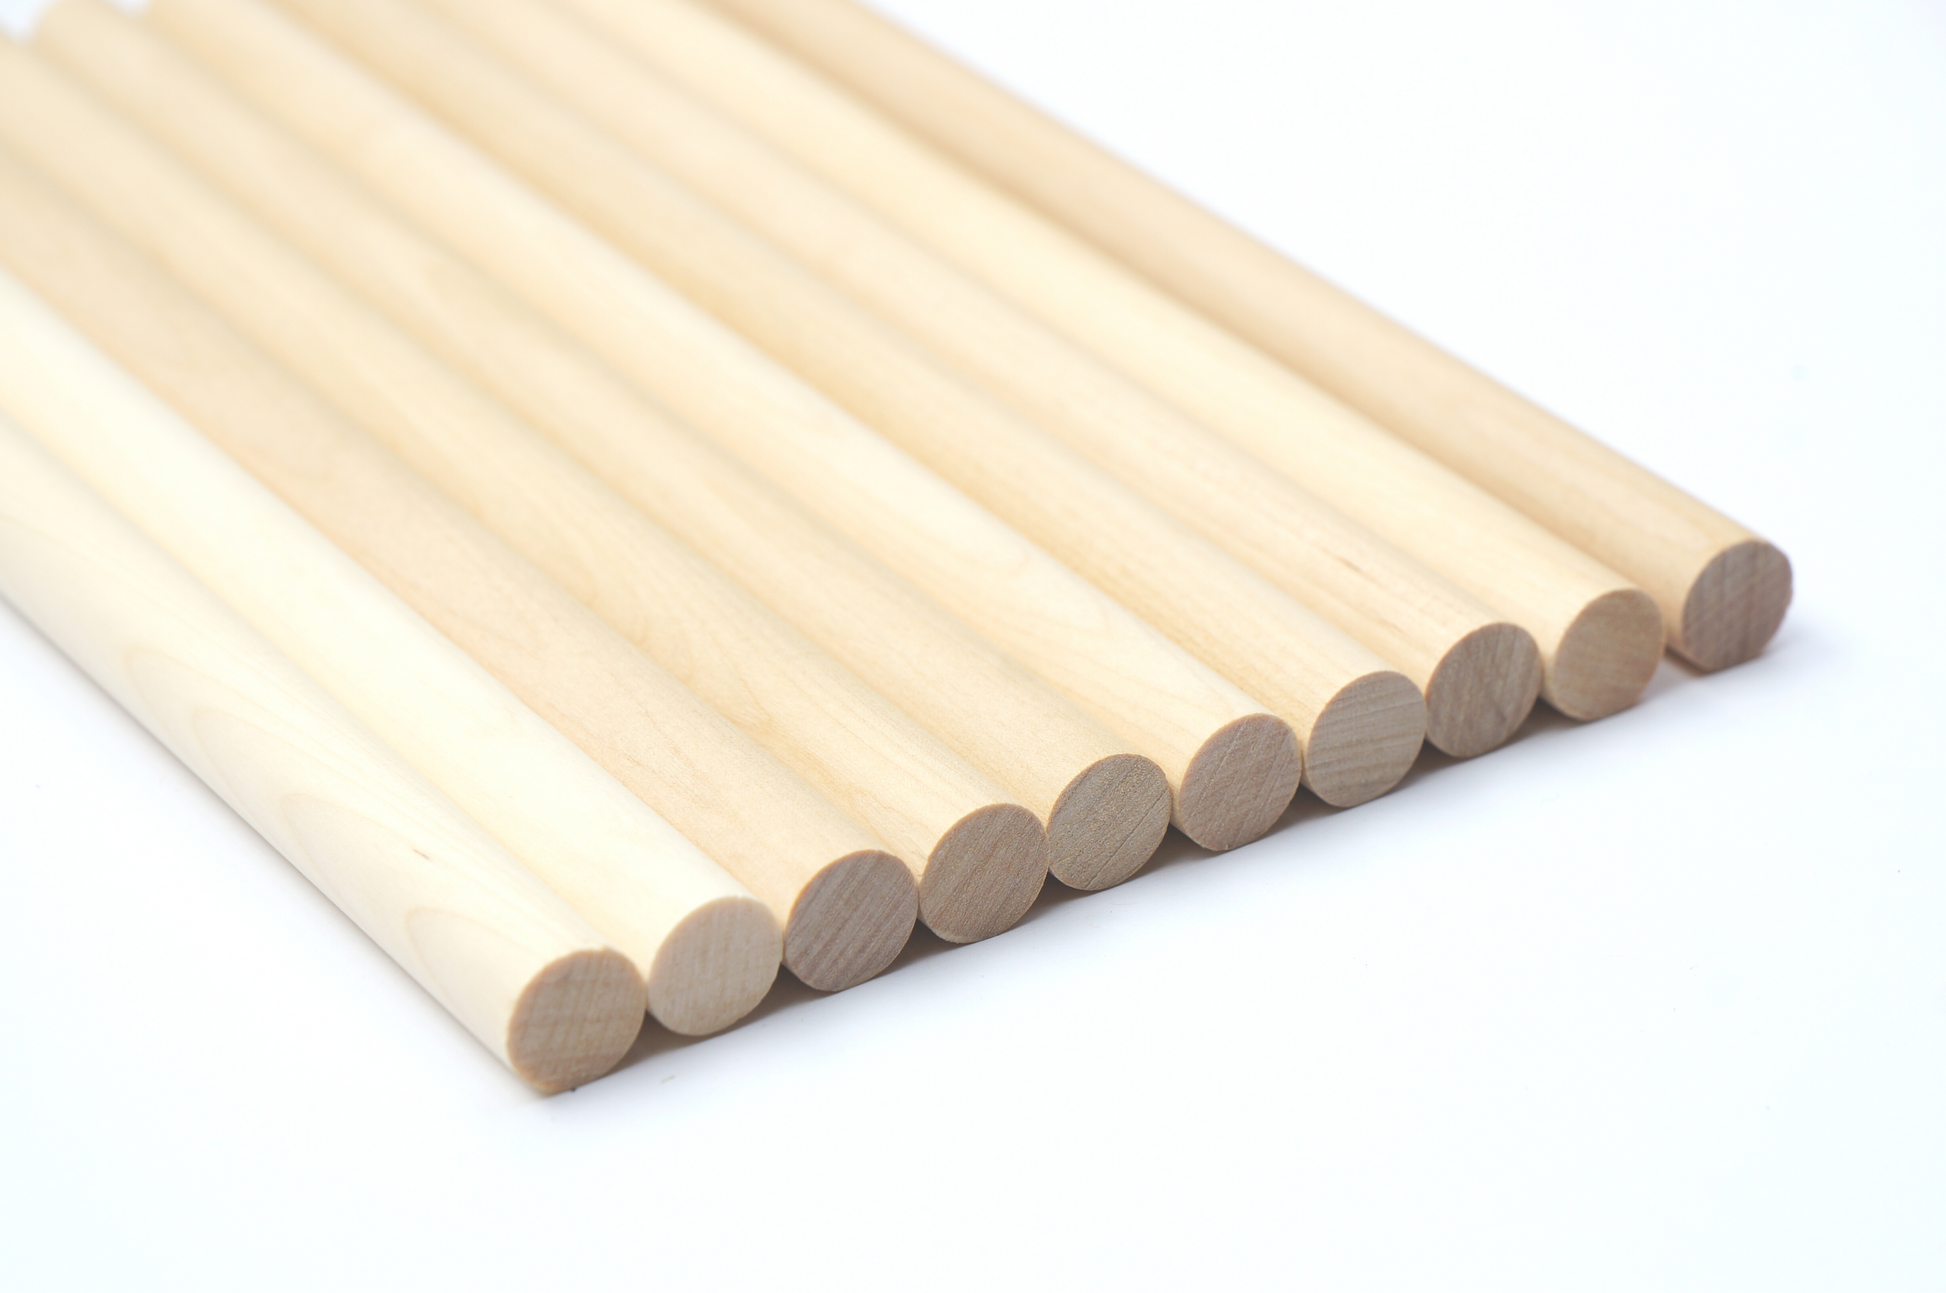 Michaels Bulk 12 Packs: 4 Ct. (48 Total) 7/16 inch x 12 inch Wooden Dowels by Creatology, Size: 7/16 x 12, Beige